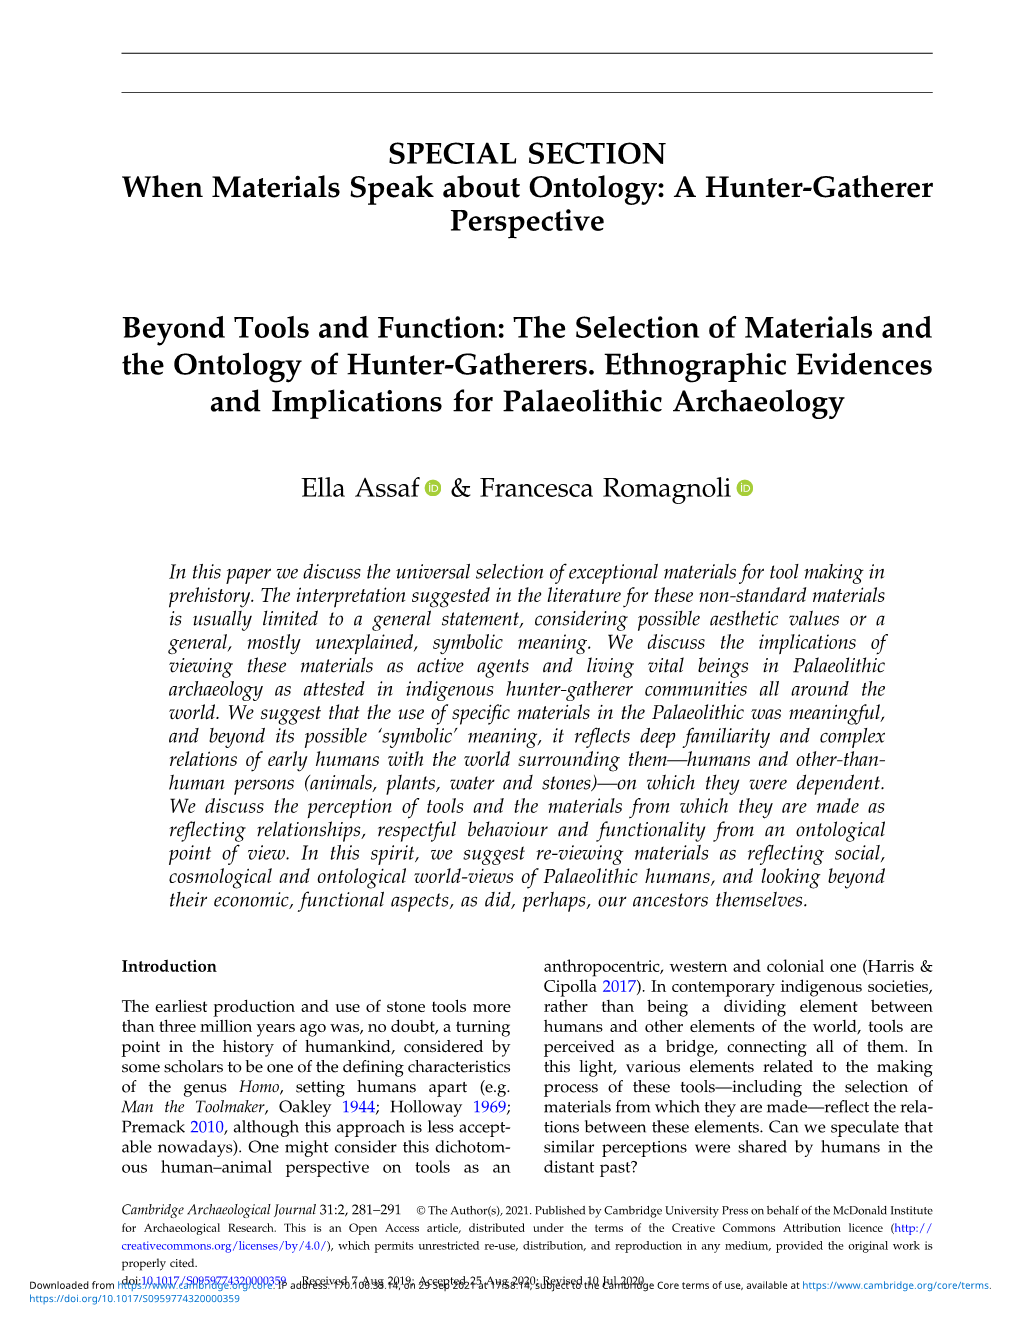 SPECIAL SECTION When Materials Speak About Ontology: a Hunter-Gatherer Perspective